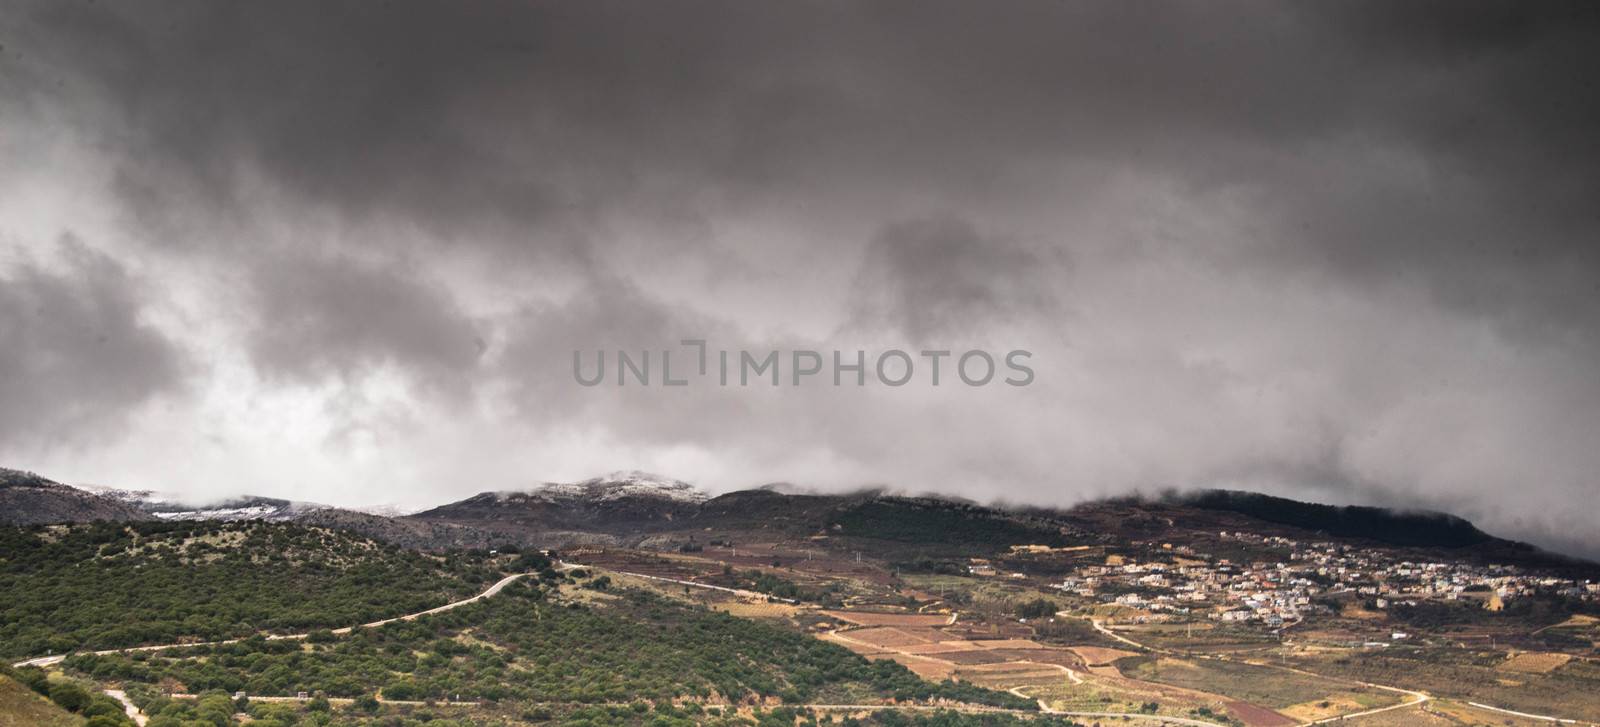 Golan heights in Israel storm winter weather with rain